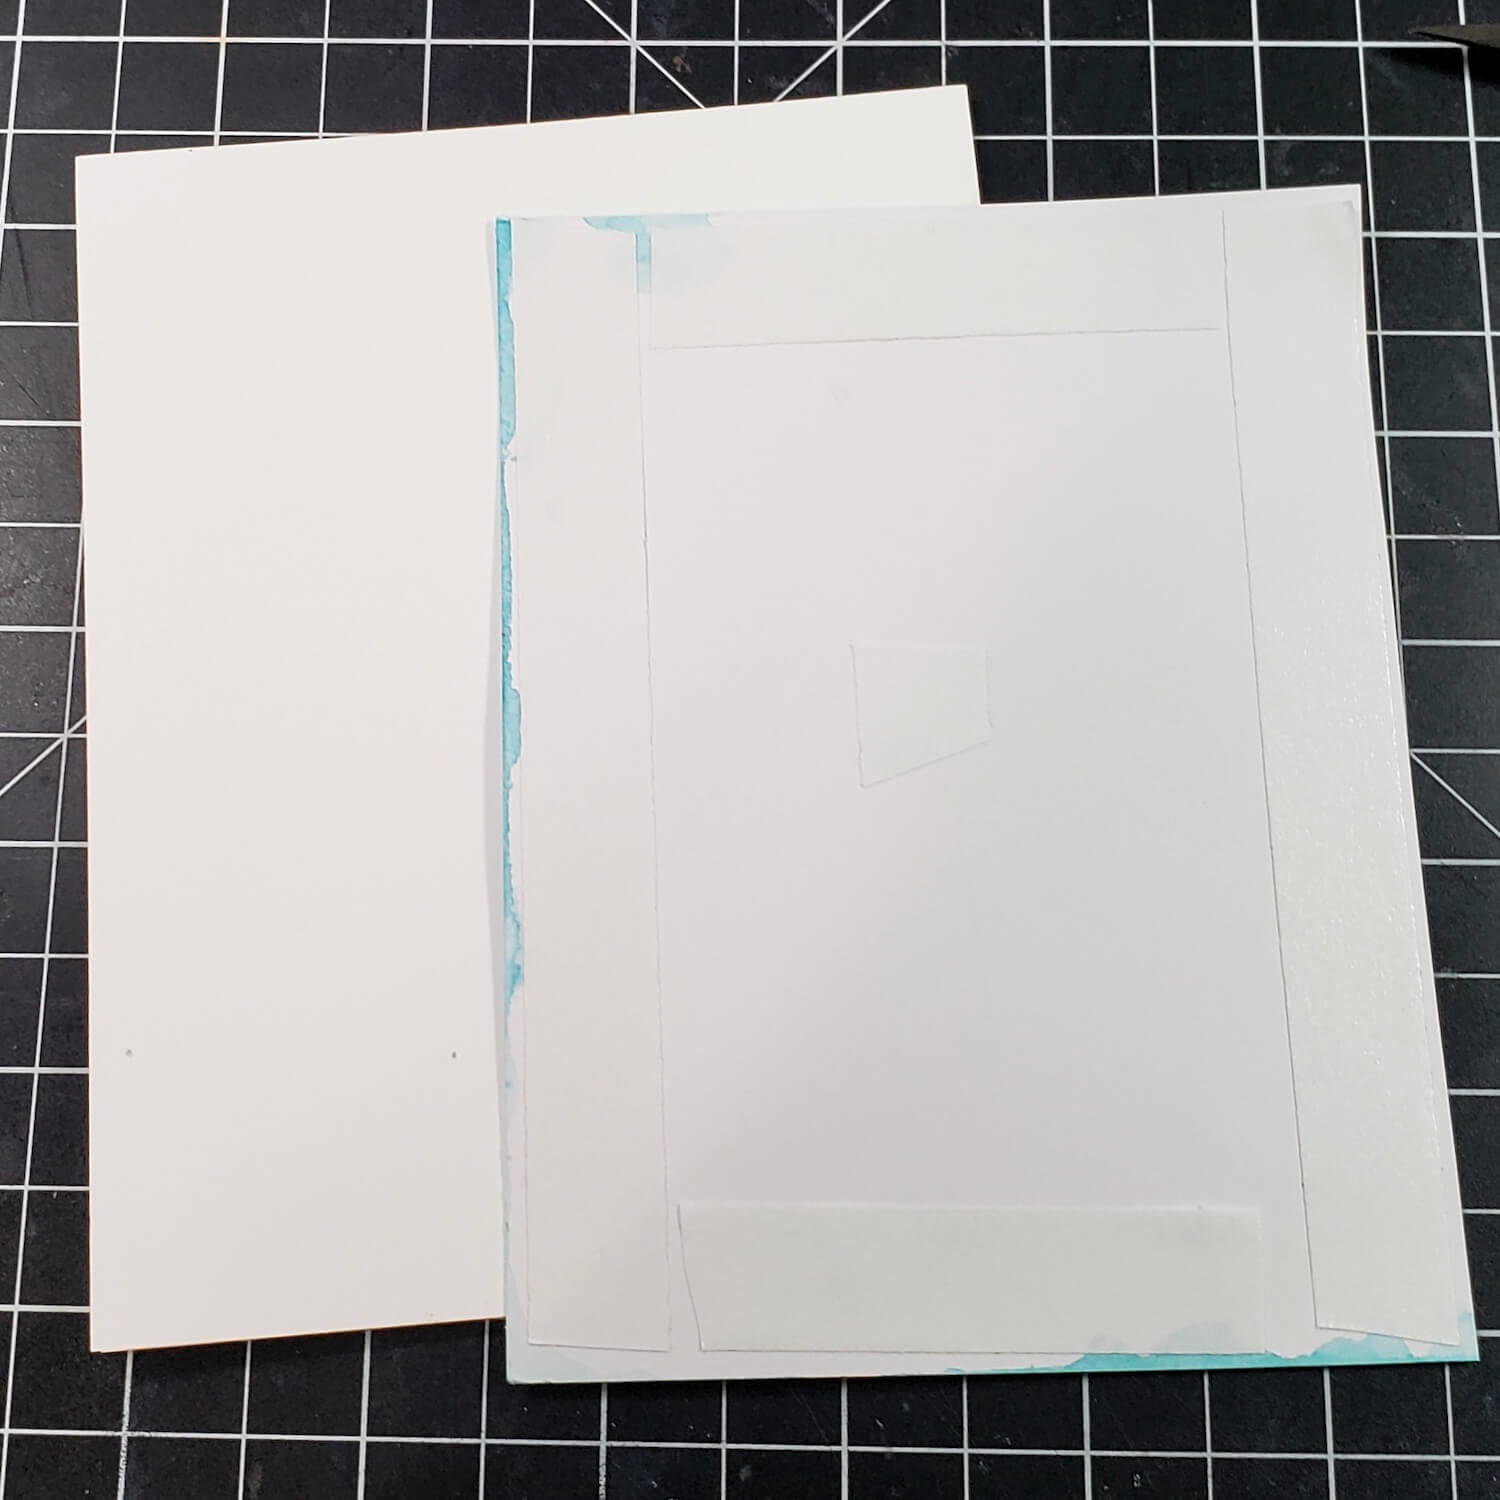 Double-sided tape on back of card panel